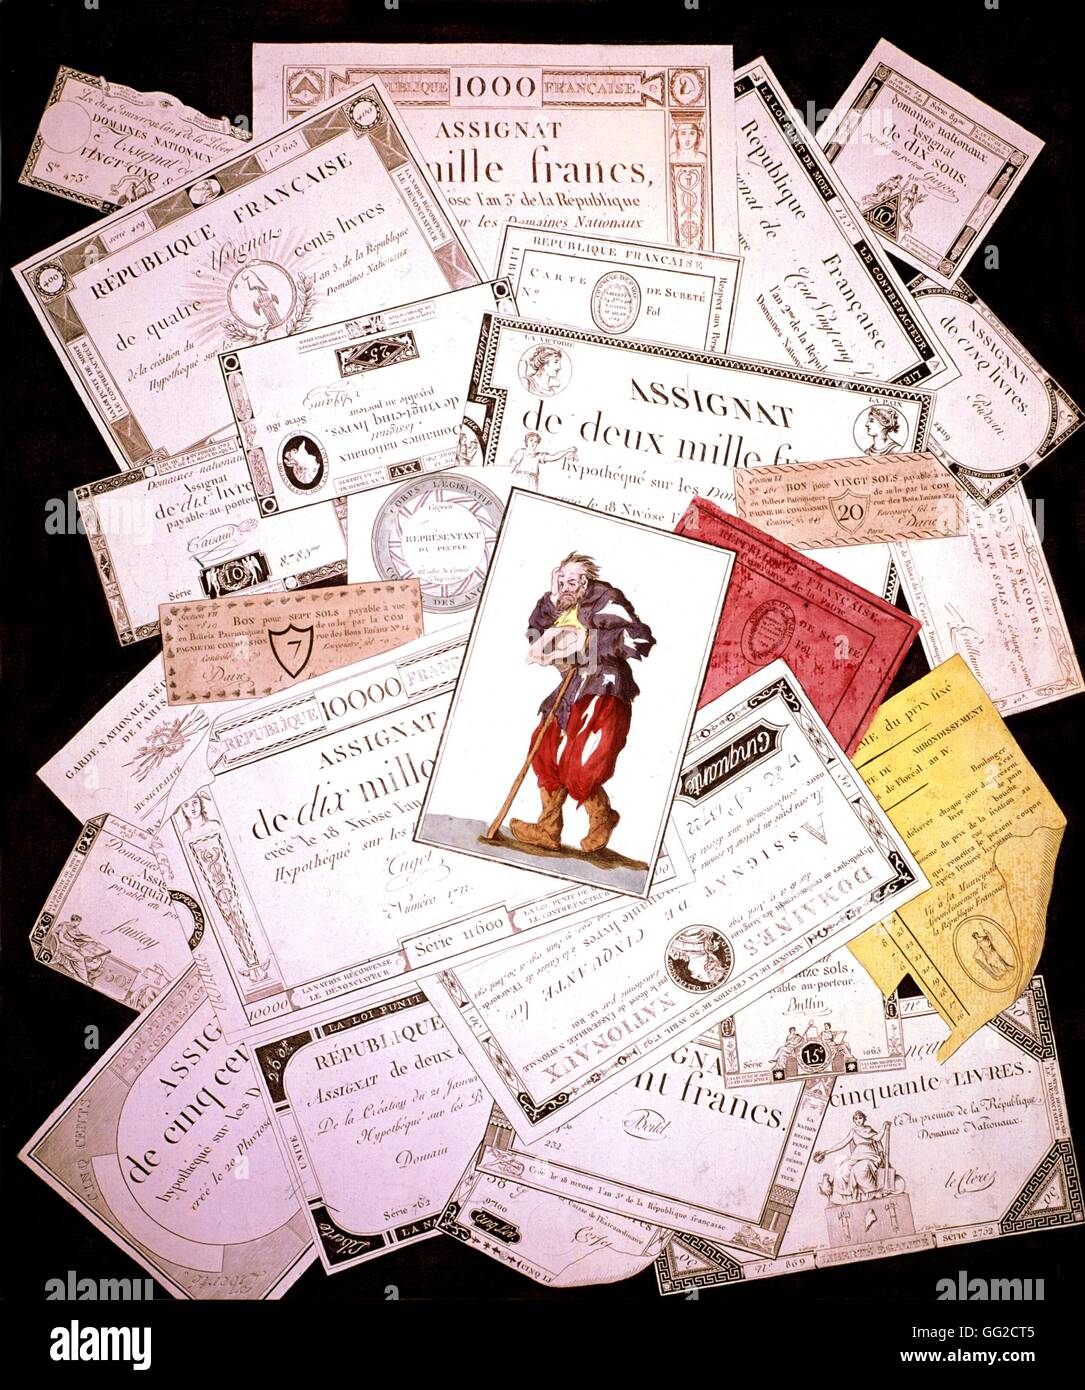 The assignats and the poor wretch'. Babeuf attacking the 'assignats' (banknotes used during the French Revolution) February 19, 1796 France, 1789 French Revolution Stock Photo